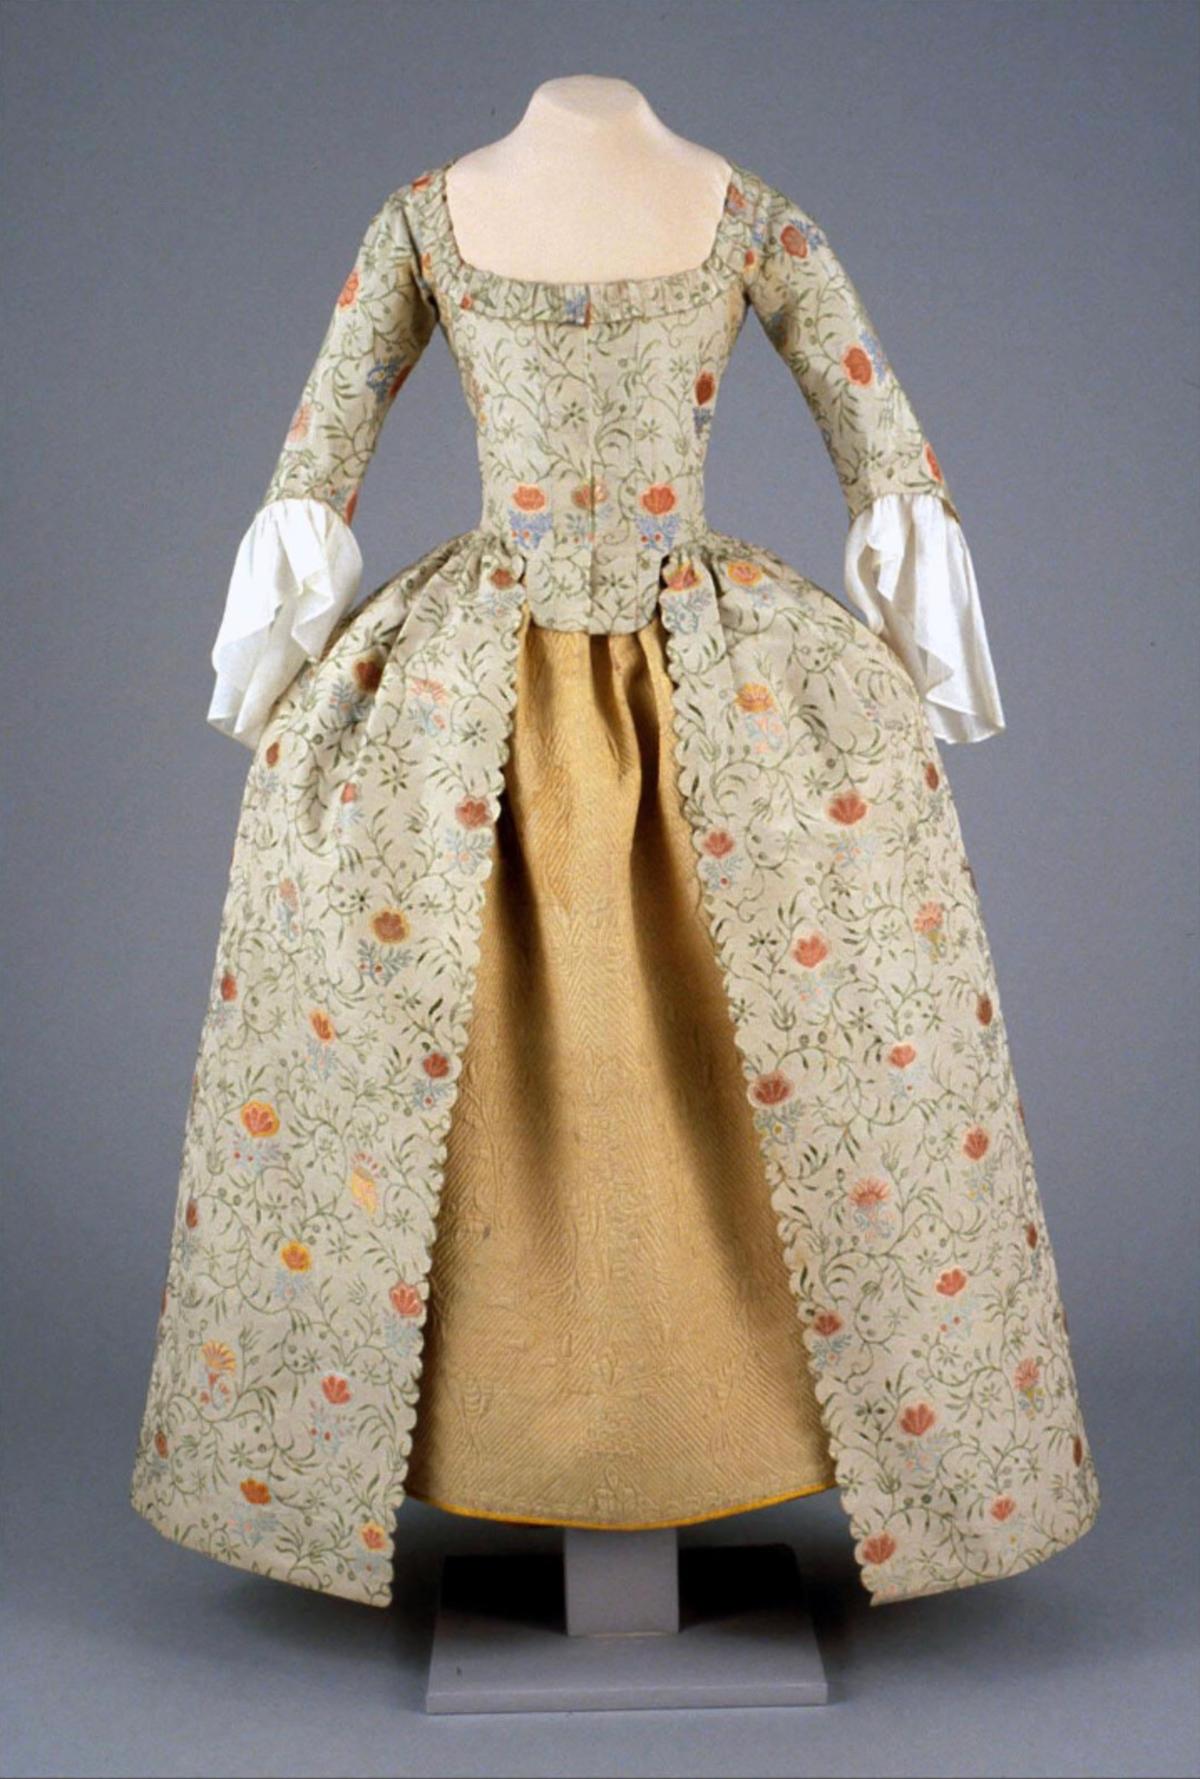 Textile designed between 1726–1785, by Anna Maria Garthwaite, for the gown made between 1775–1785. Silk "lampas" brocaded with silk and linen. The Colonial Williamsburg Foundation. (Courtesy of Baltimore Museum of Art)